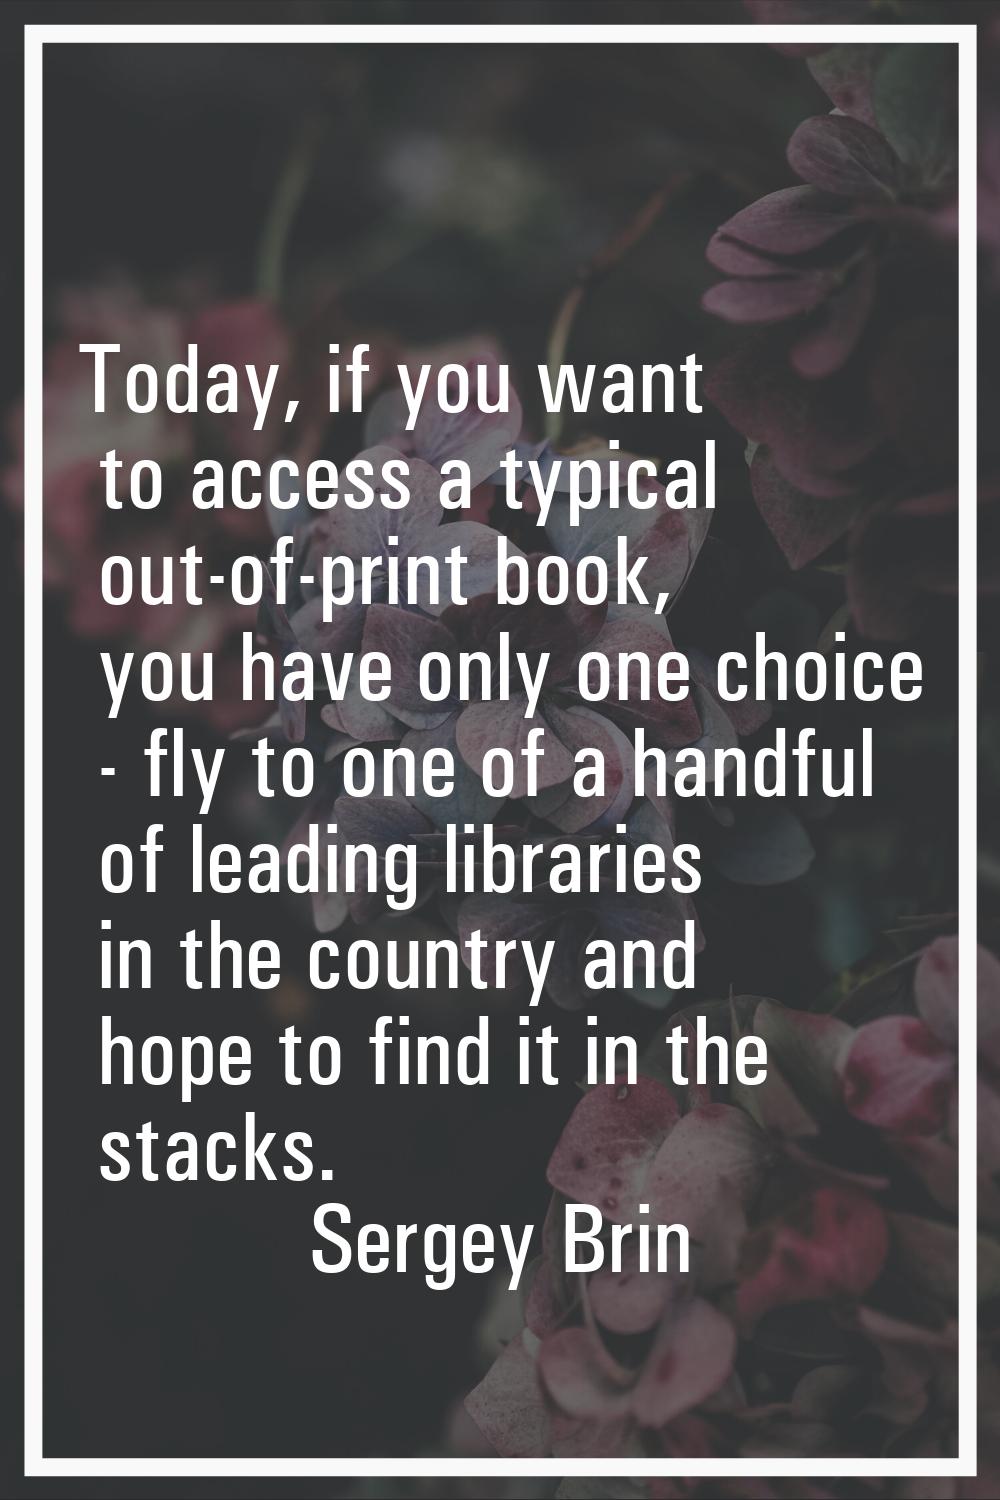 Today, if you want to access a typical out-of-print book, you have only one choice - fly to one of 